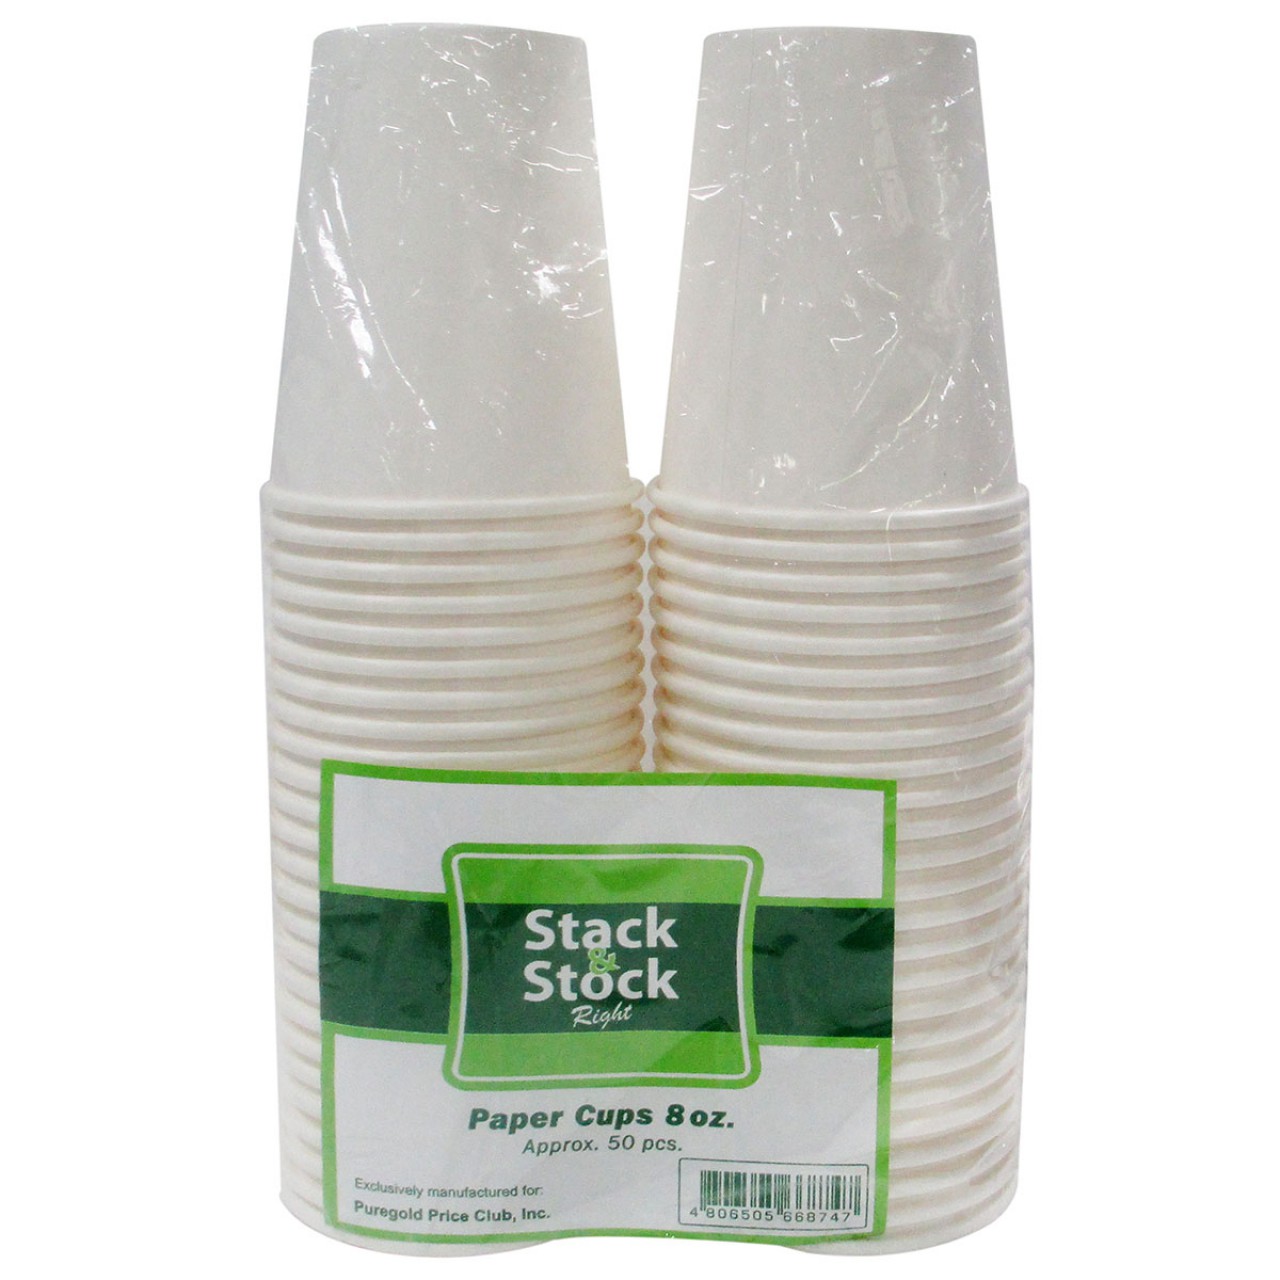 STACK & STOCK PAPER CUP  8OZ 50PCS